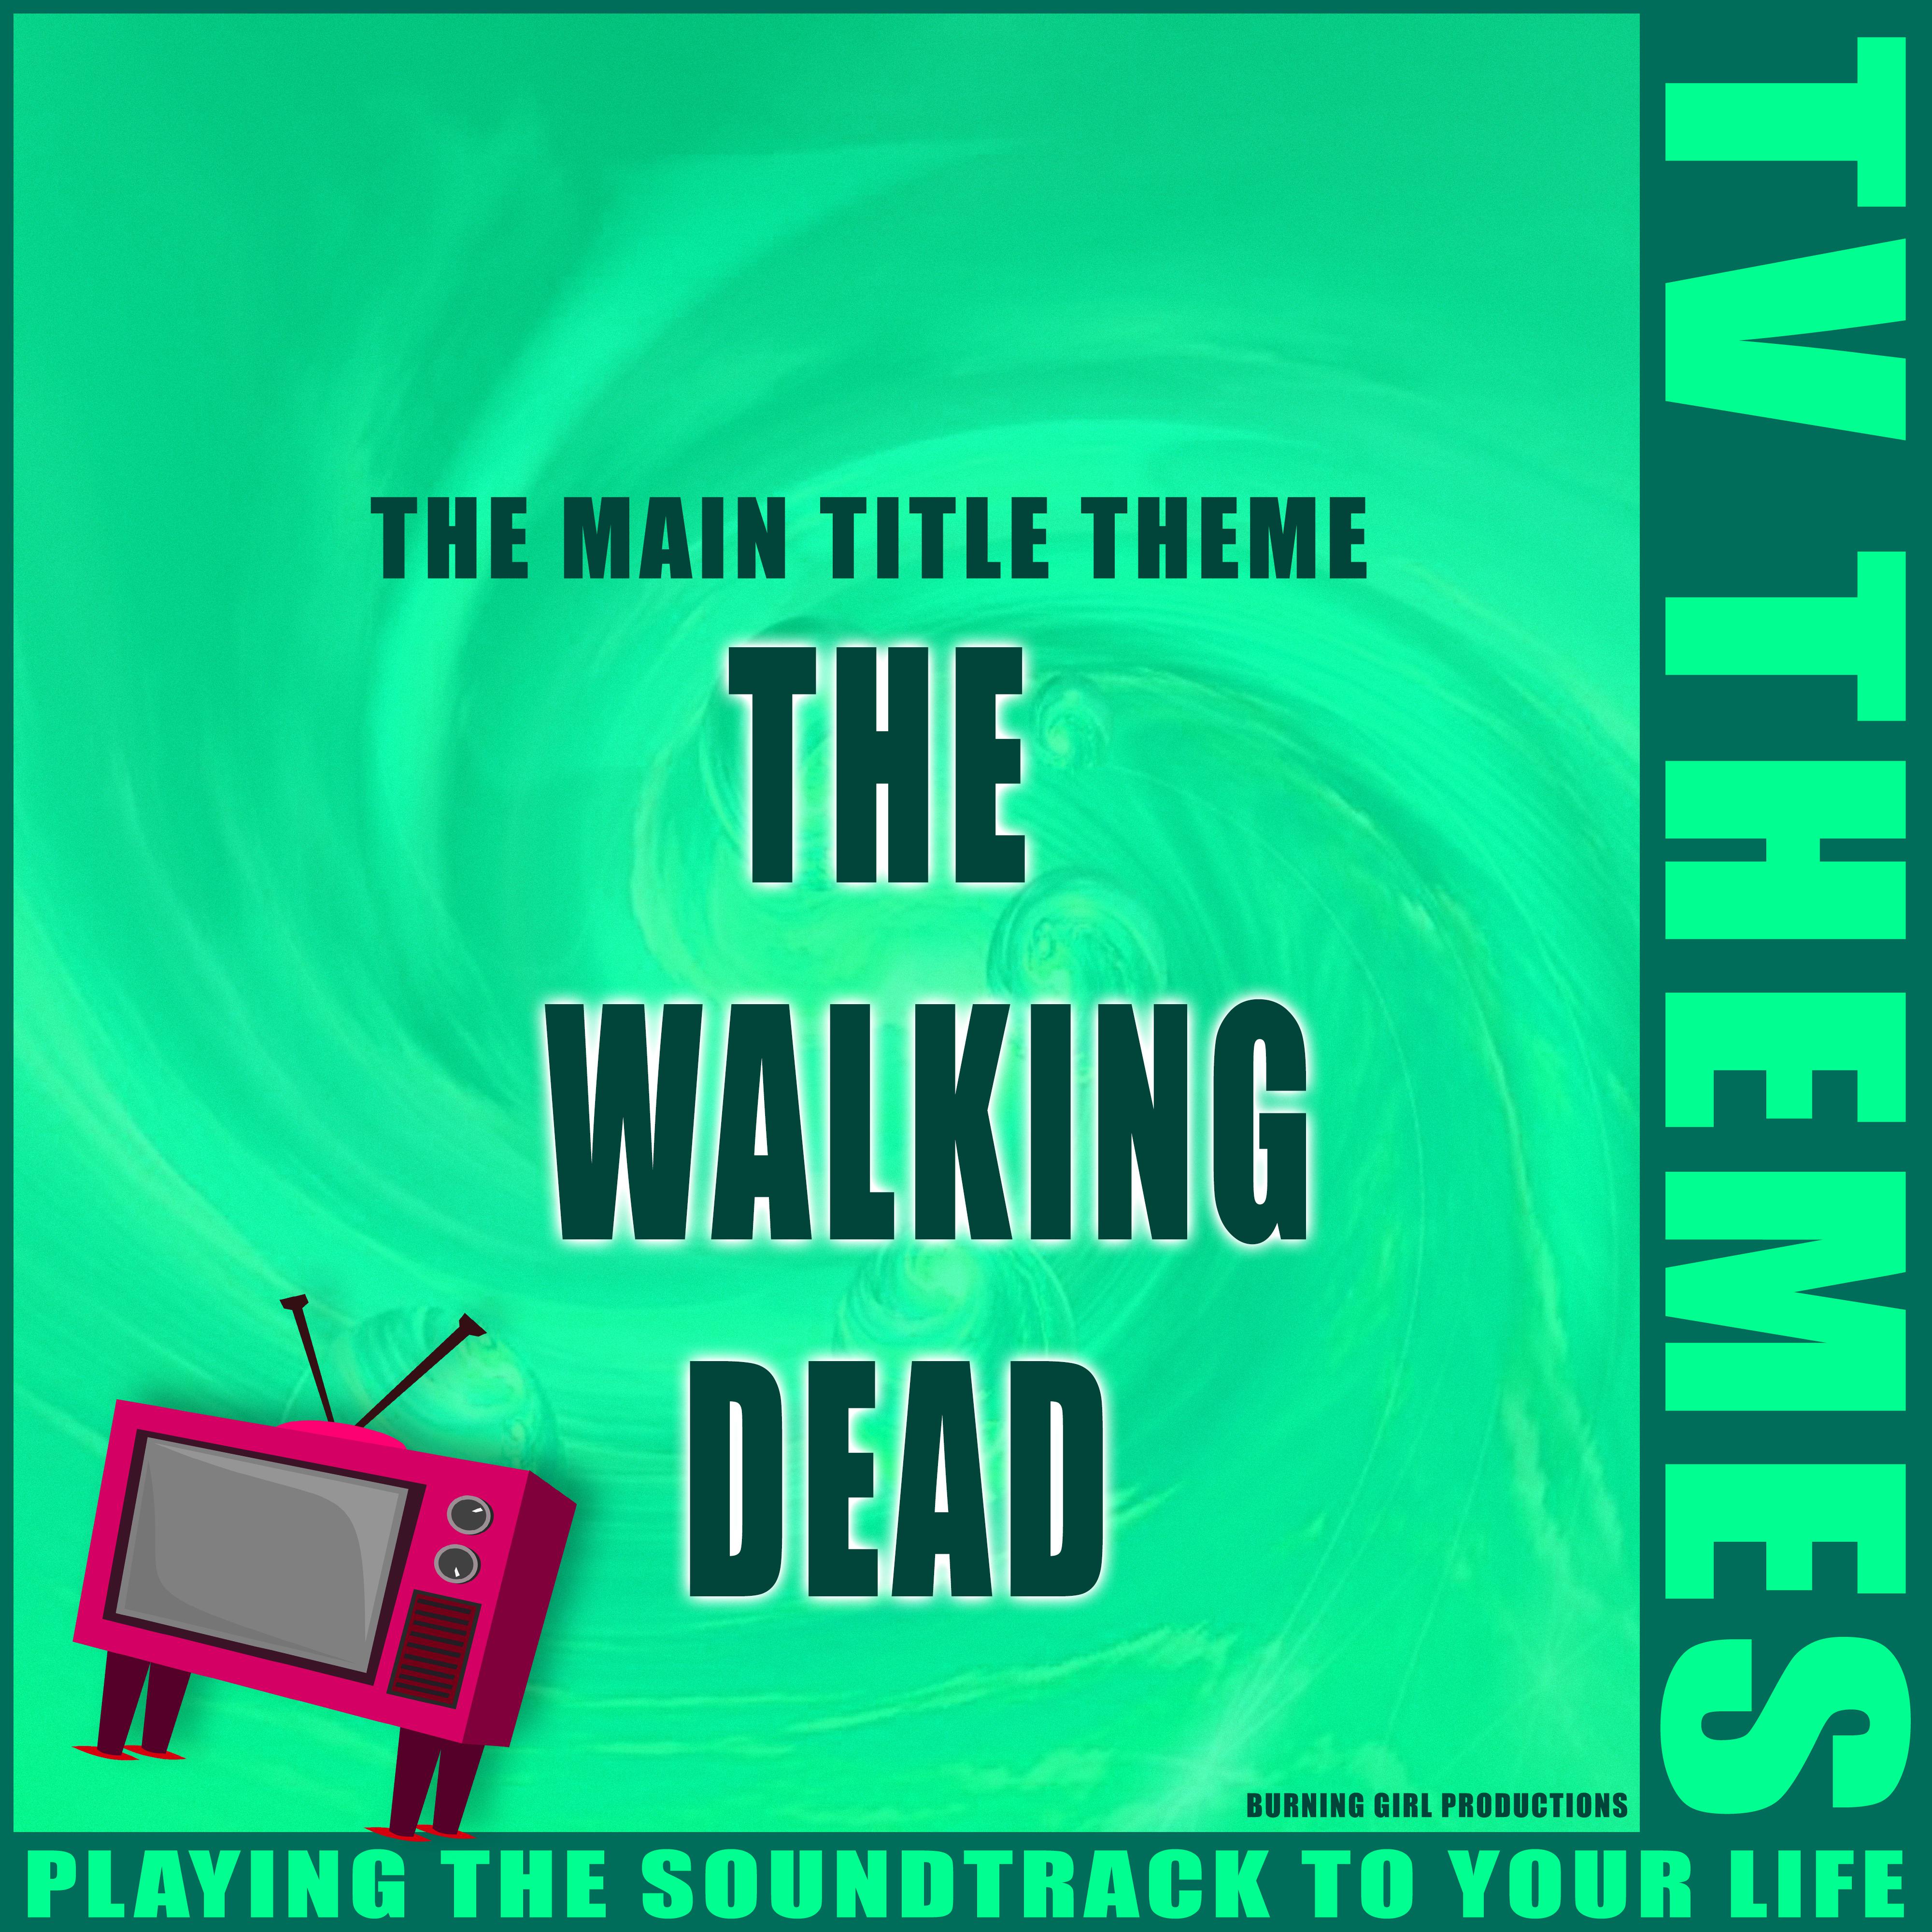 The Walking Dead - The Main Title Theme